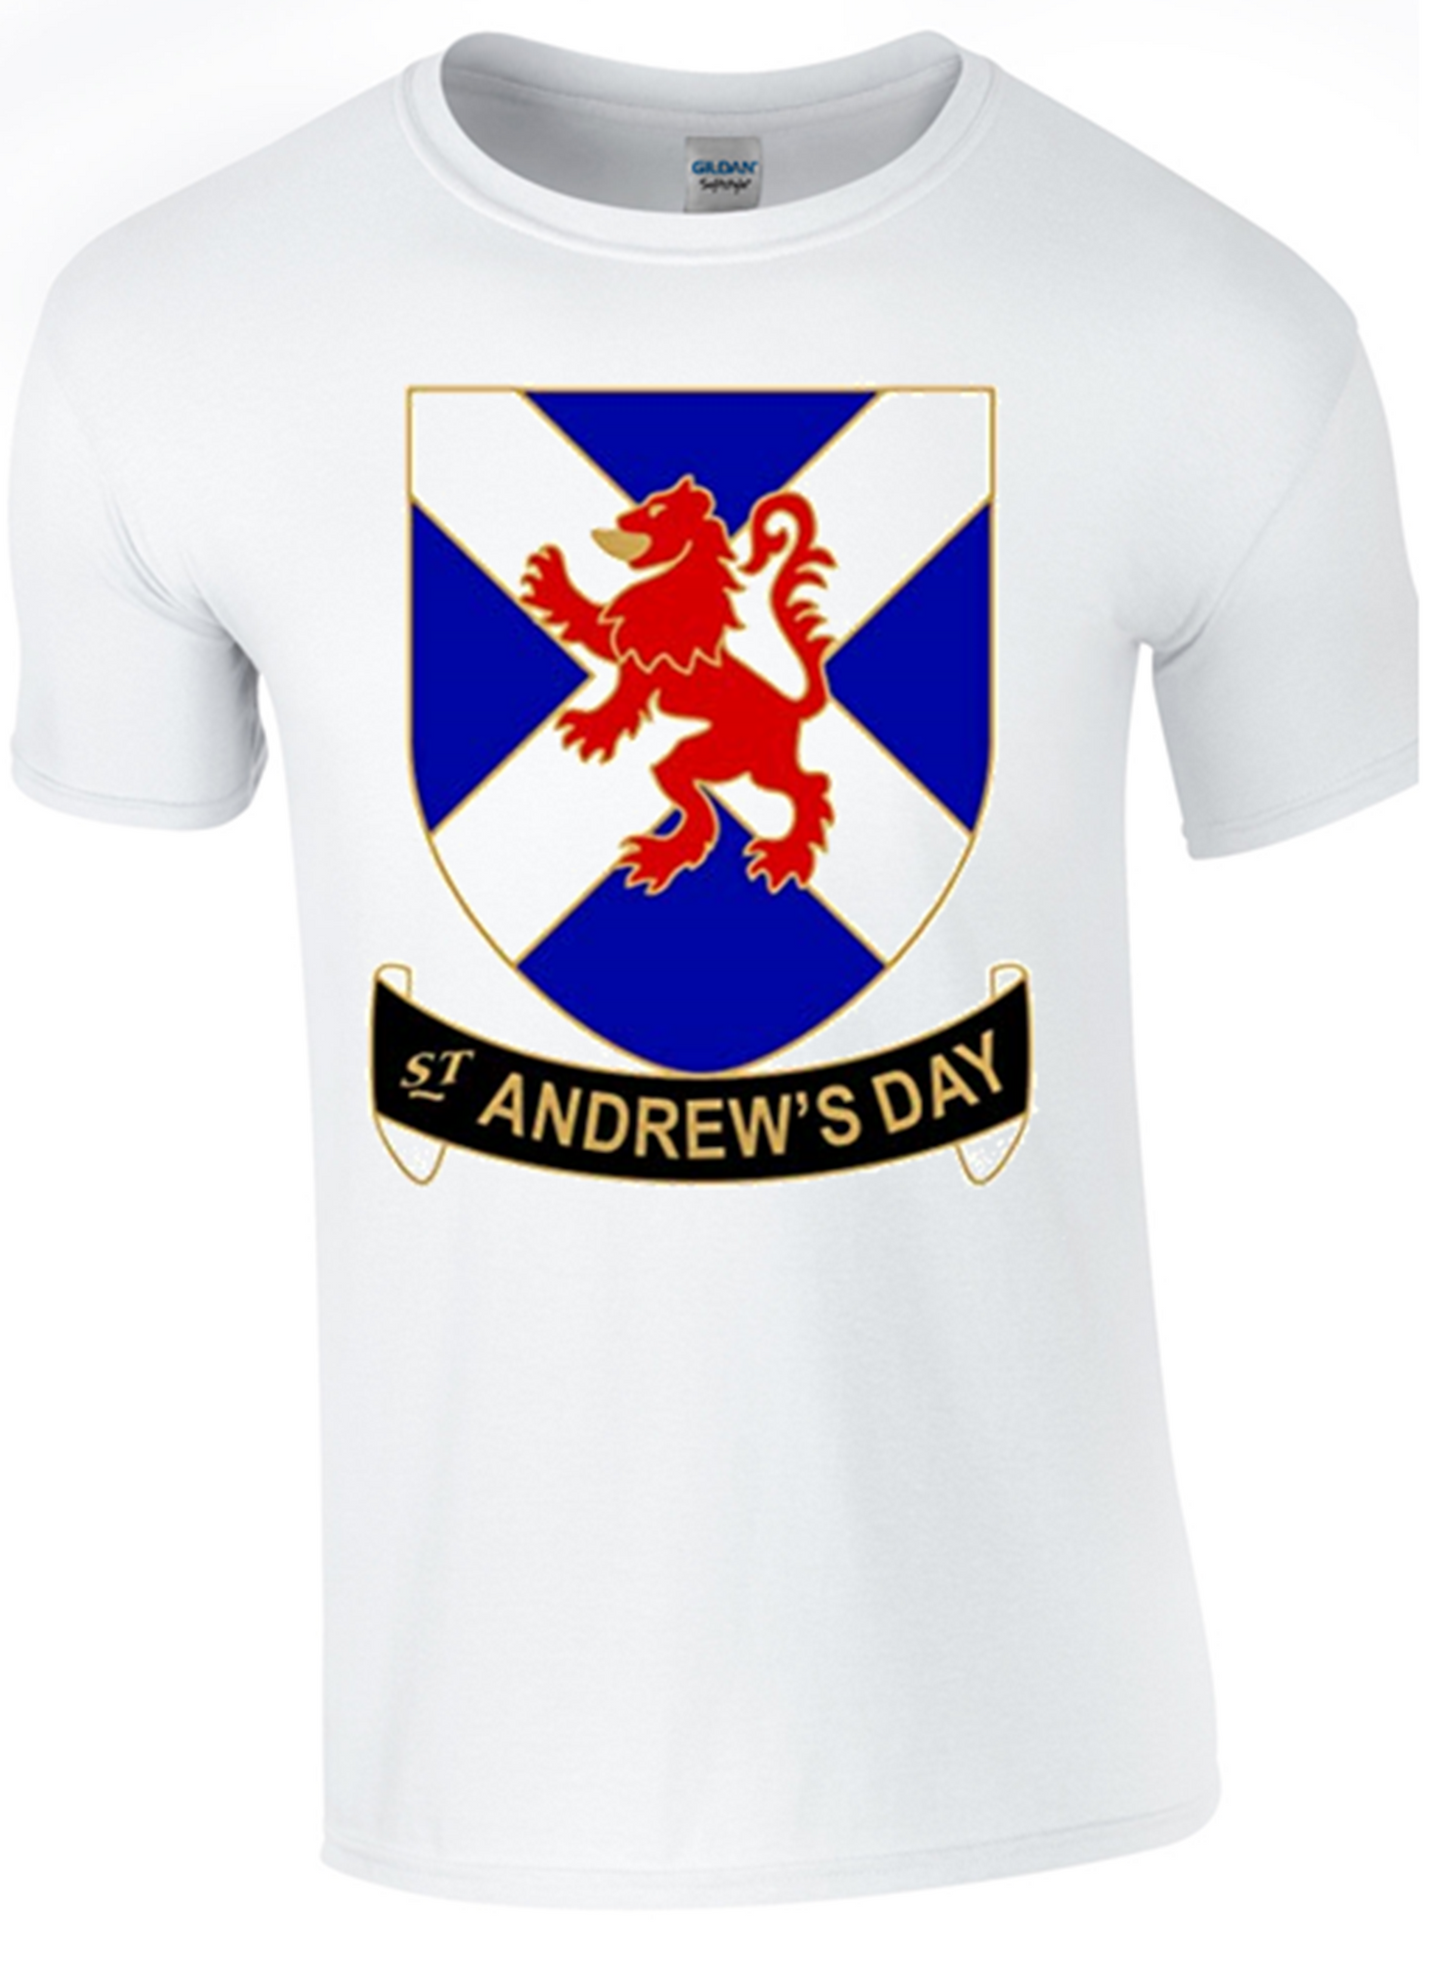 St Andrew's Day Celebration T-Shirt - Army 1157 Kit  Veterans Owned Business